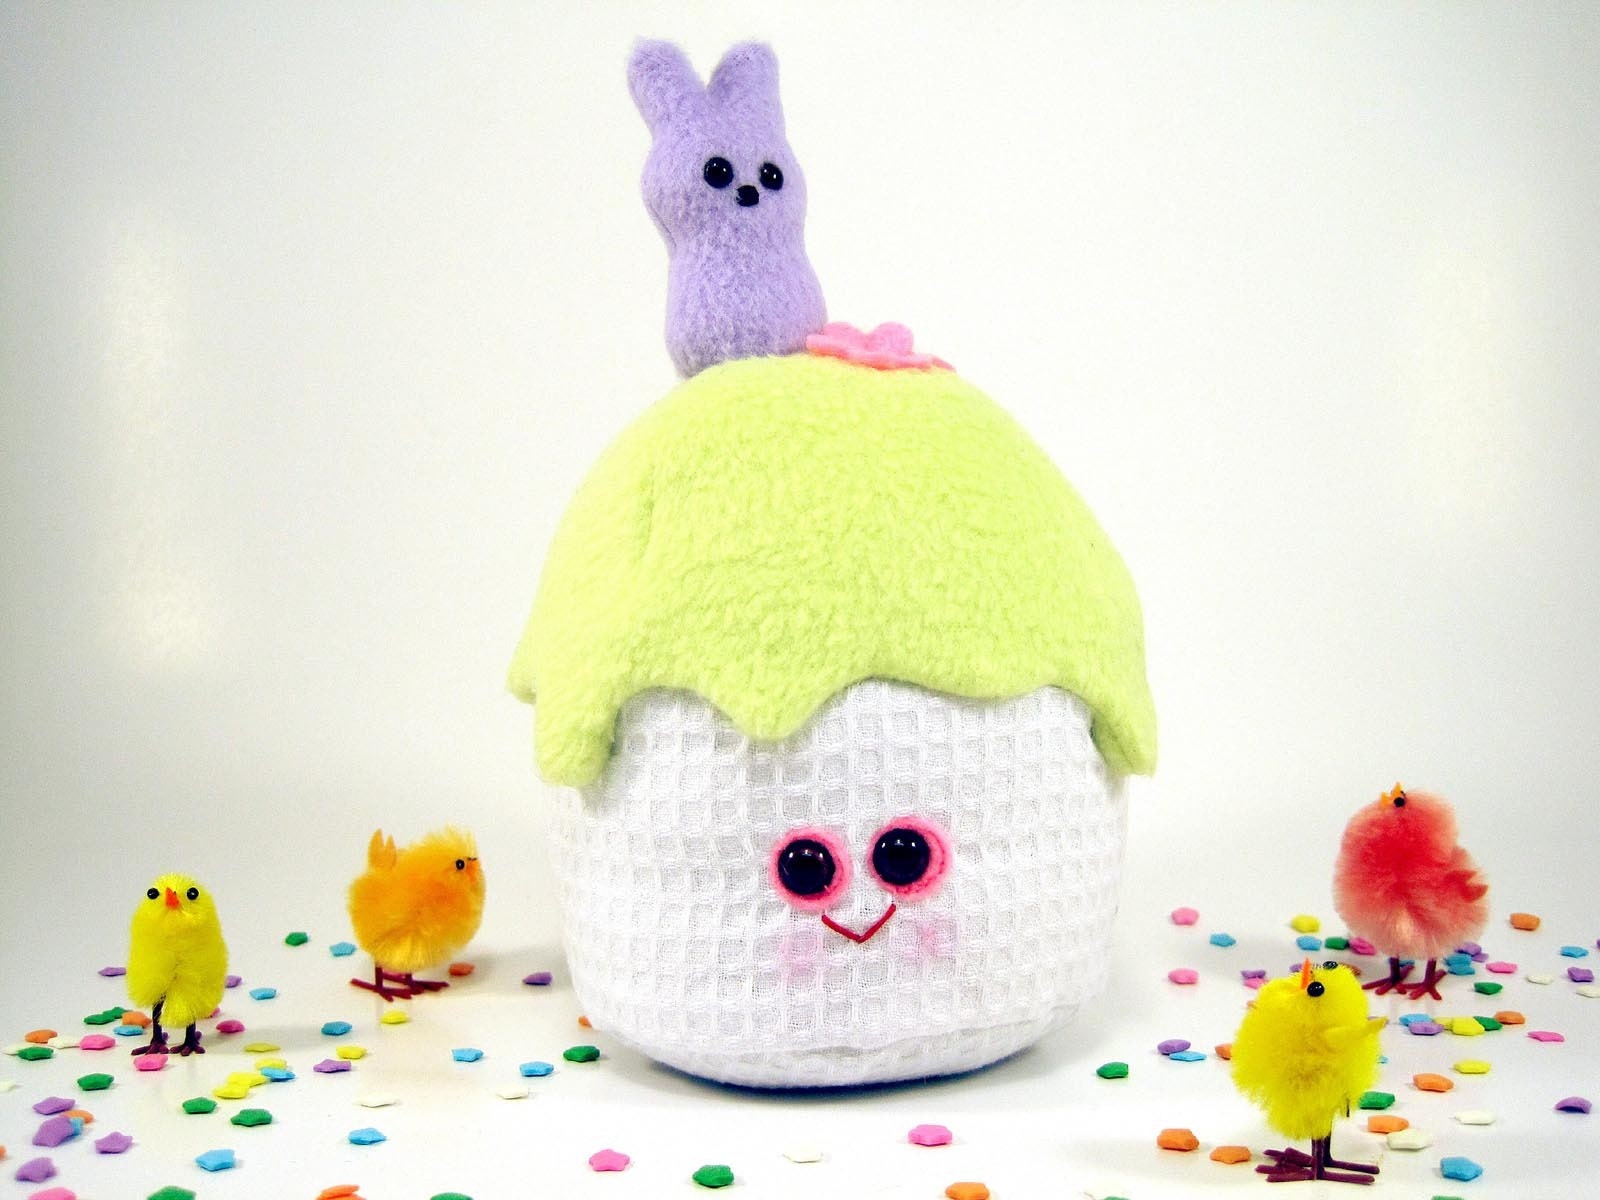 Plush Easter Cupcake...sweet treat of a toy.